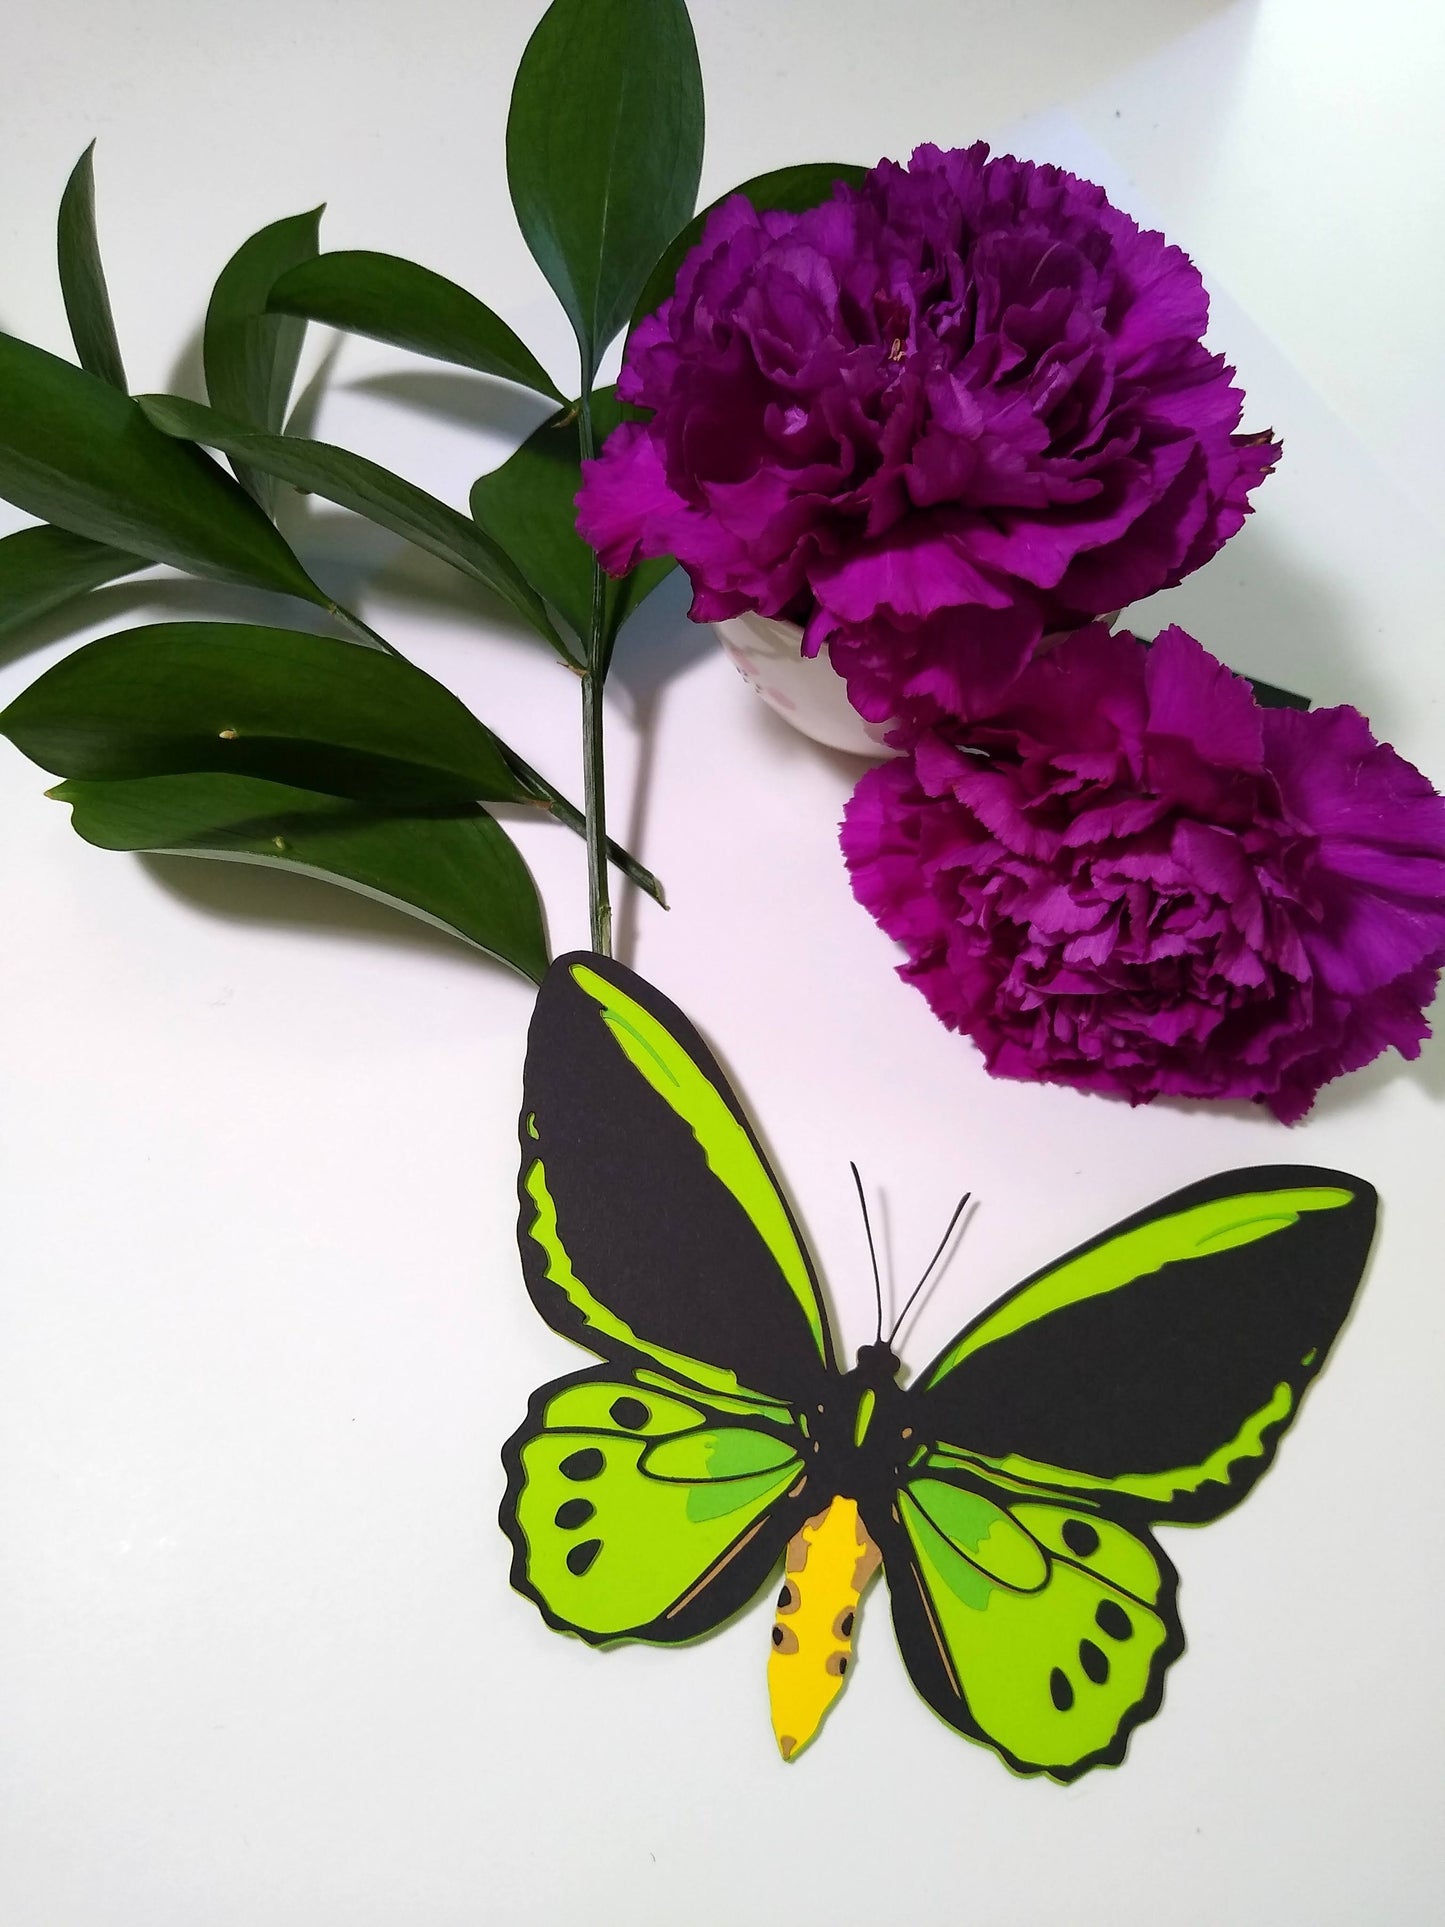 A multi-layered paper butterfly rests on a table. It is in the design of the front of a Cairns Birdwing butterfly. It rests below sprigs of leaves and two purple flowers.